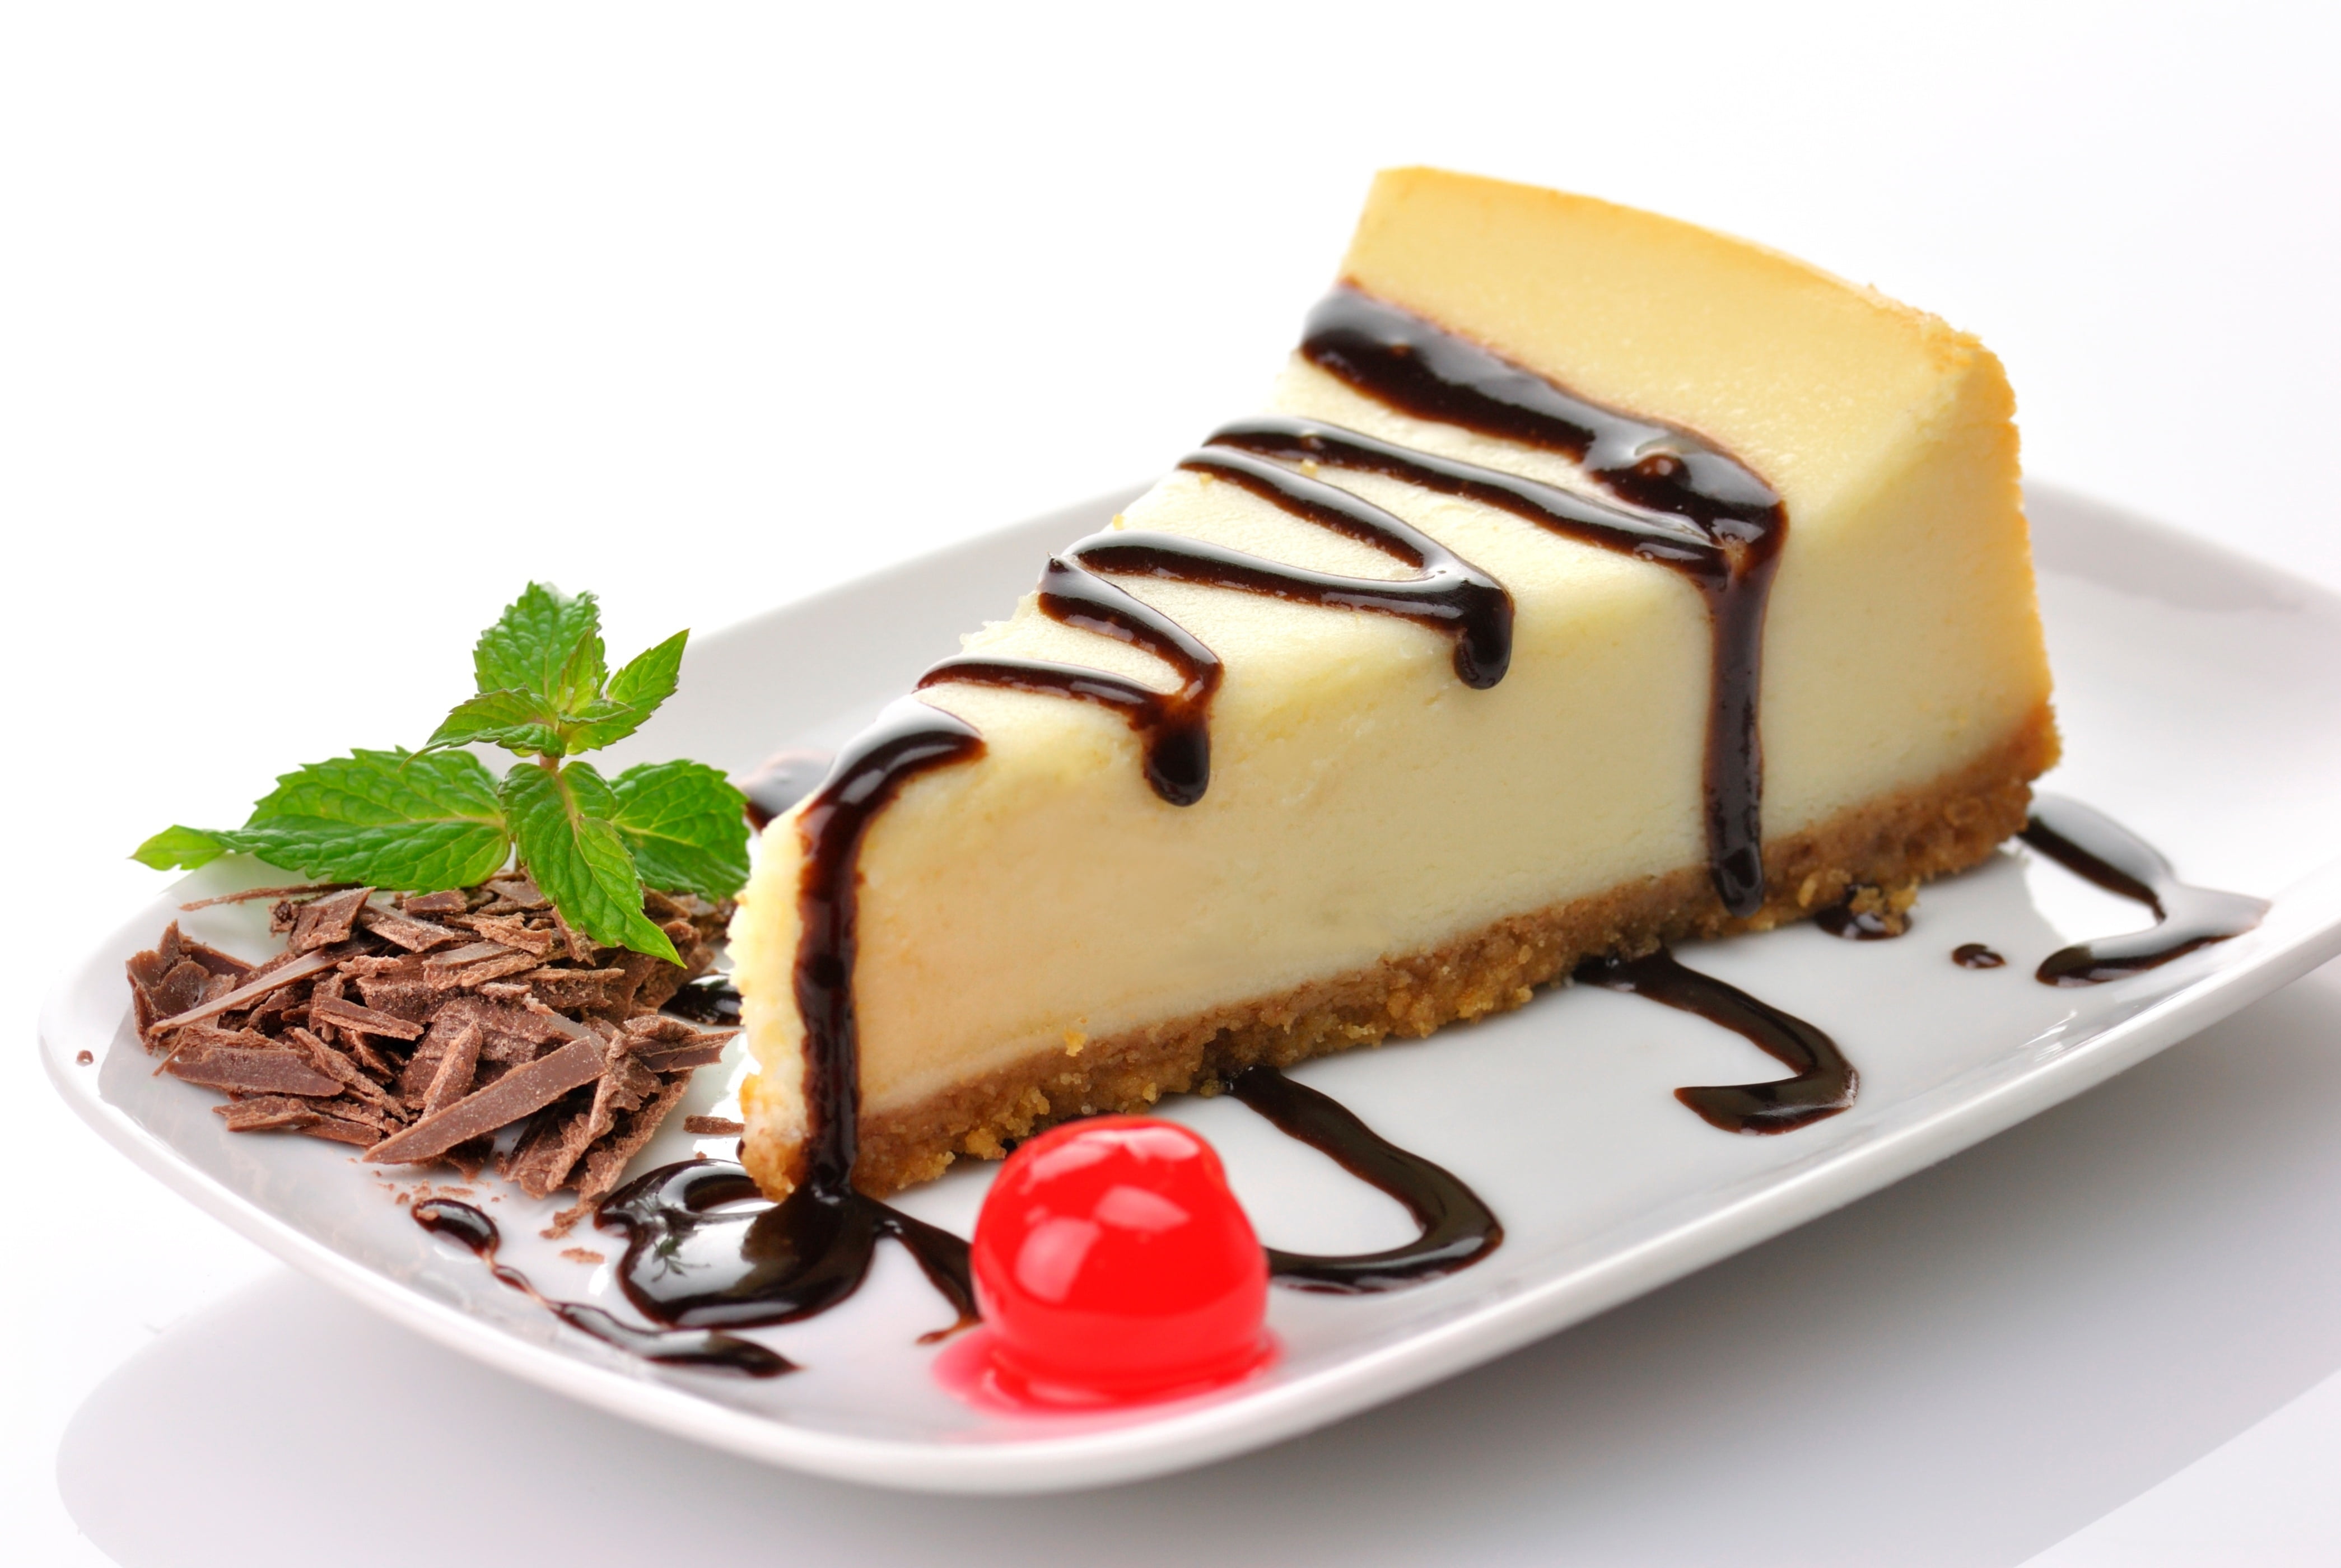 slice of cake with chocolate syrup on white ceramic plate HD wallpaper.